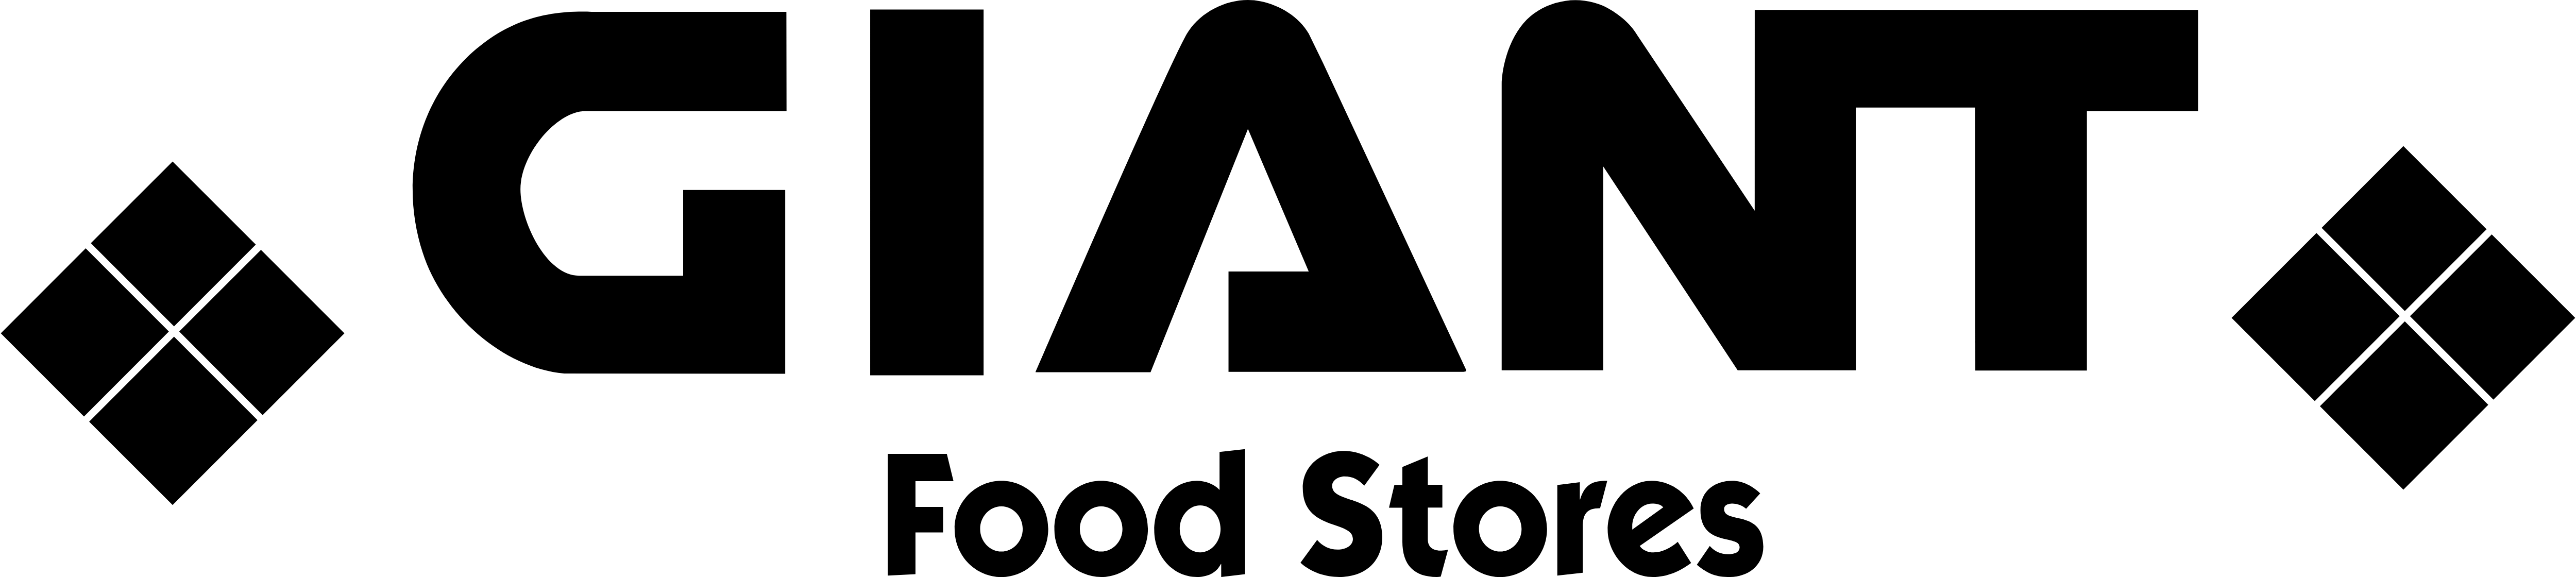 Giant Food Stores Logo - Giant Food Stores – Logos Download